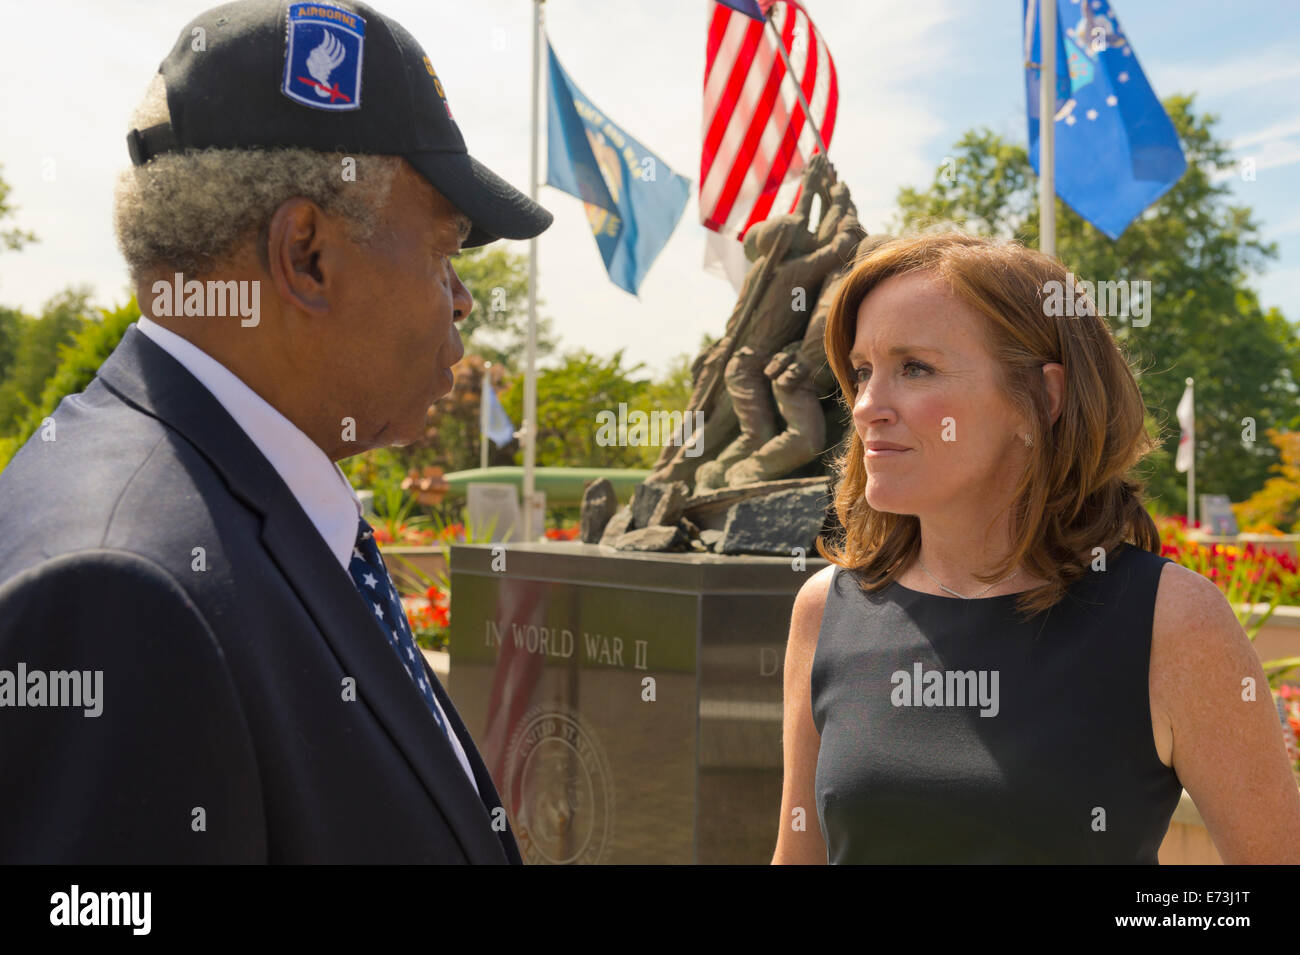 East Meadow, New York, USA. 3rd September, 2014.  KATHLEEN RICE, Democratic congressional candidate (NY-04), is speaking with one of the members of her campaign's new Veterans Advisory Committee, JEREMIAH E. BRYANT, of Rockville Centre, U.S. Army, Vietnam War Veteran. Rice announced formation of the committee and released a whitepaper on veterans policy, at Veterans Memorial at Eisenhower Park. Rice is in her third term as Nassau County District Attorney, Long Island. Credit:  Ann E Parry/Alamy Live News Stock Photo